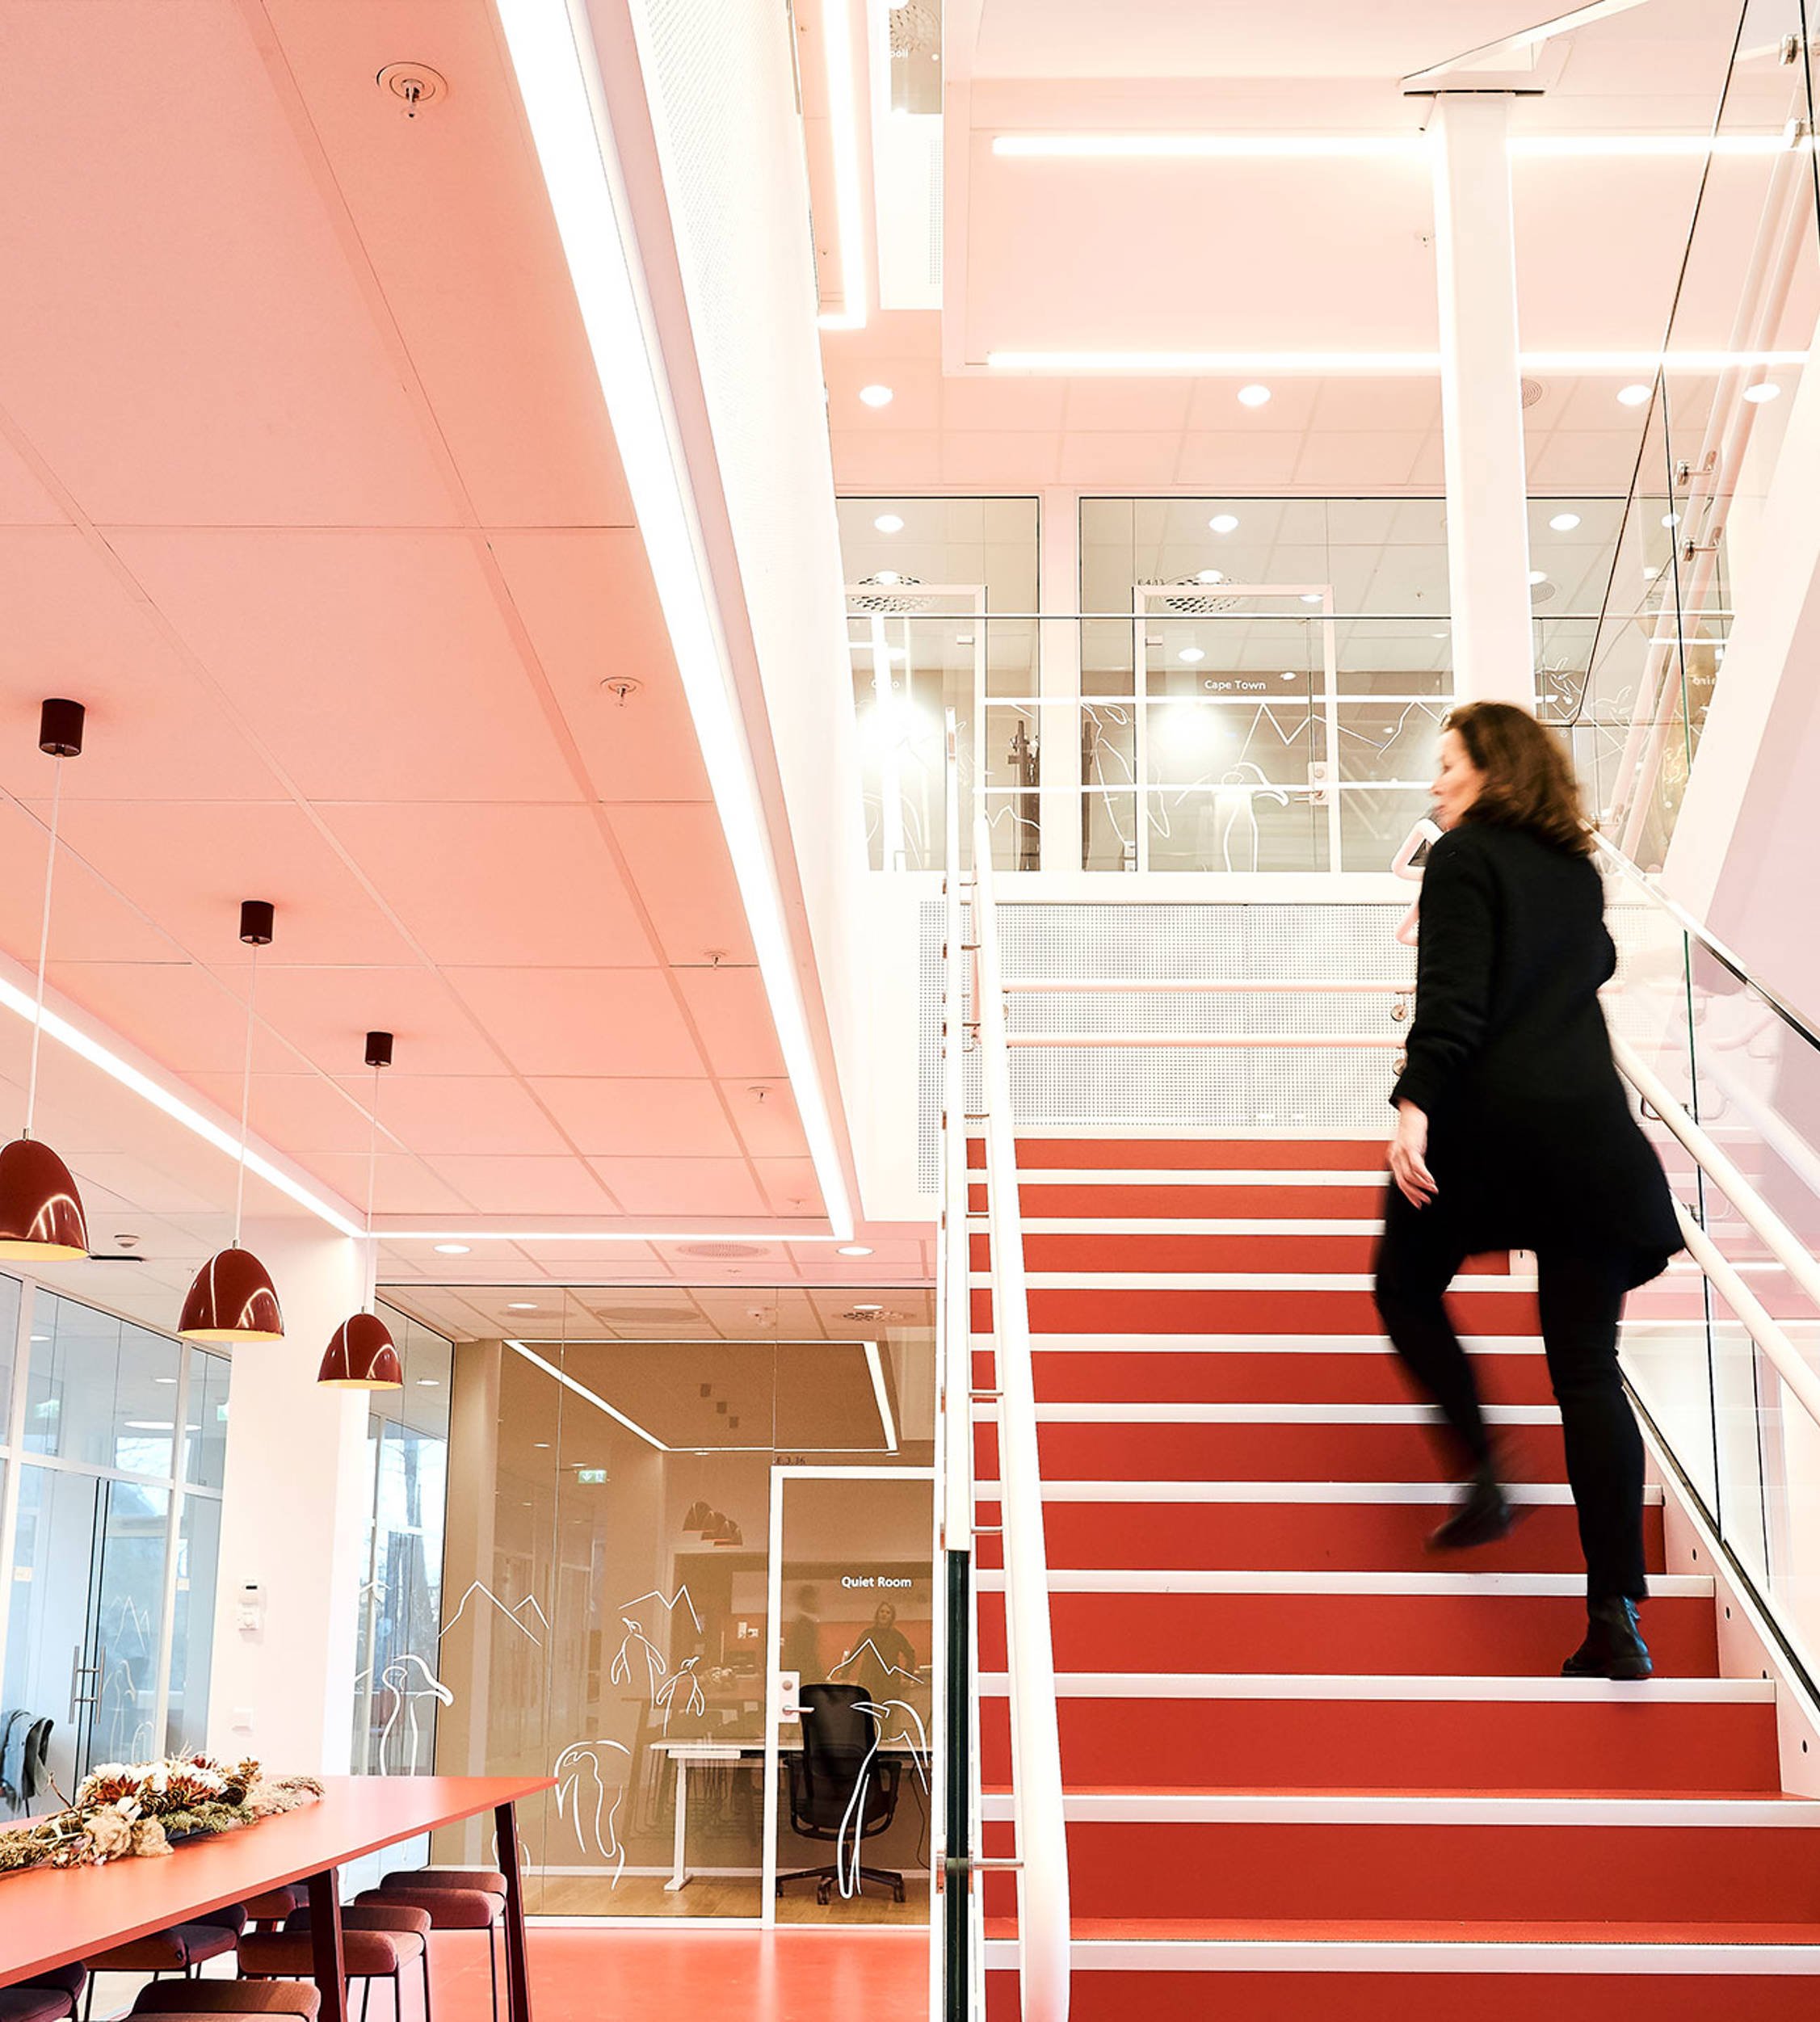 People walking in the stairs at Jotun's office in Sandefjord, Norway